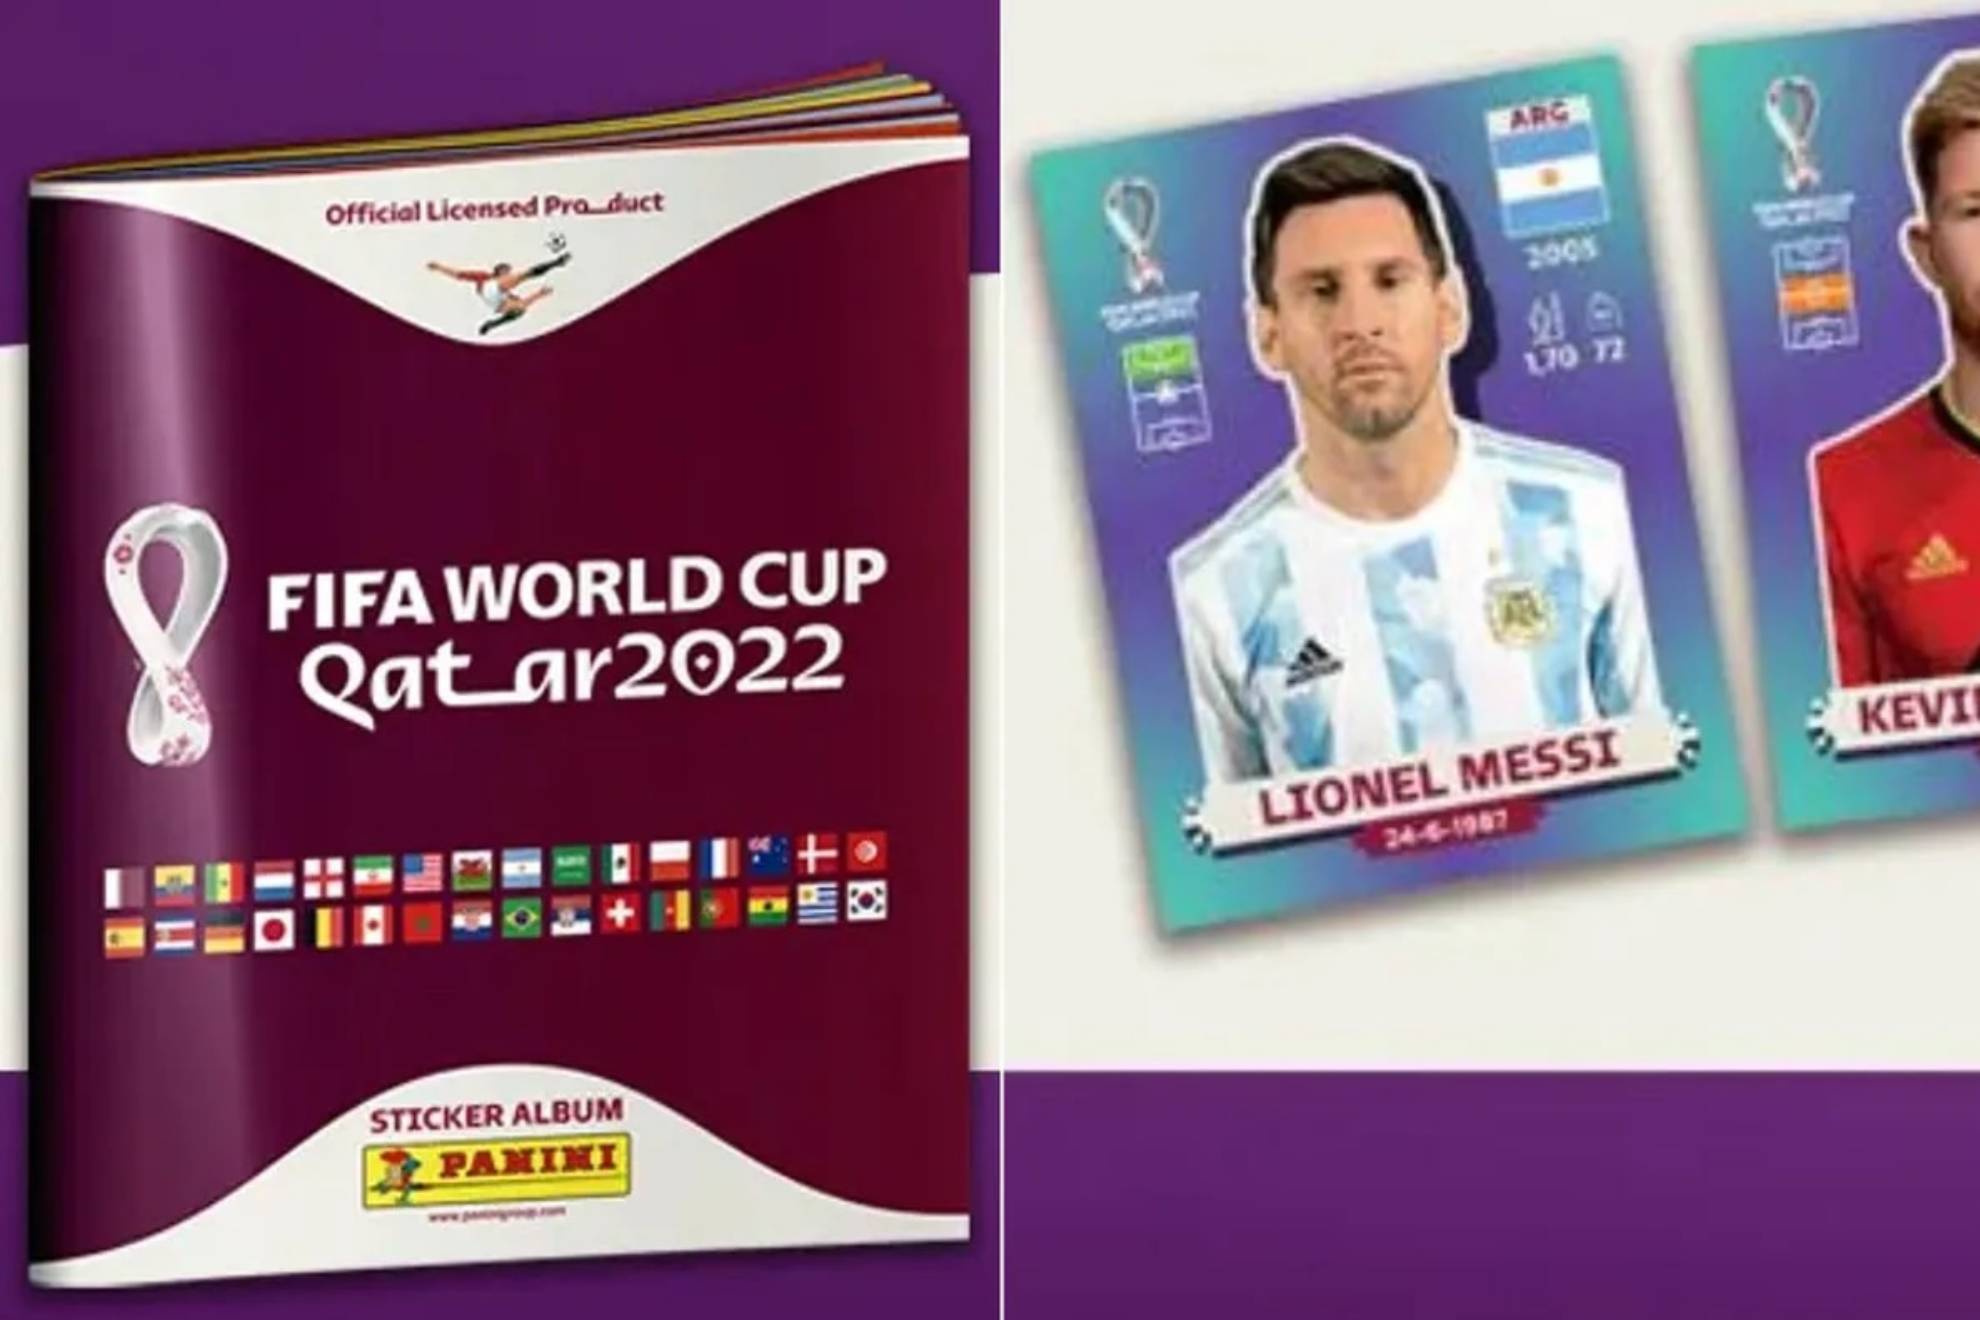 World Cup 2022 How much does it cost to fill the Panini Album of the Qatar 2022 World Cup? Marca